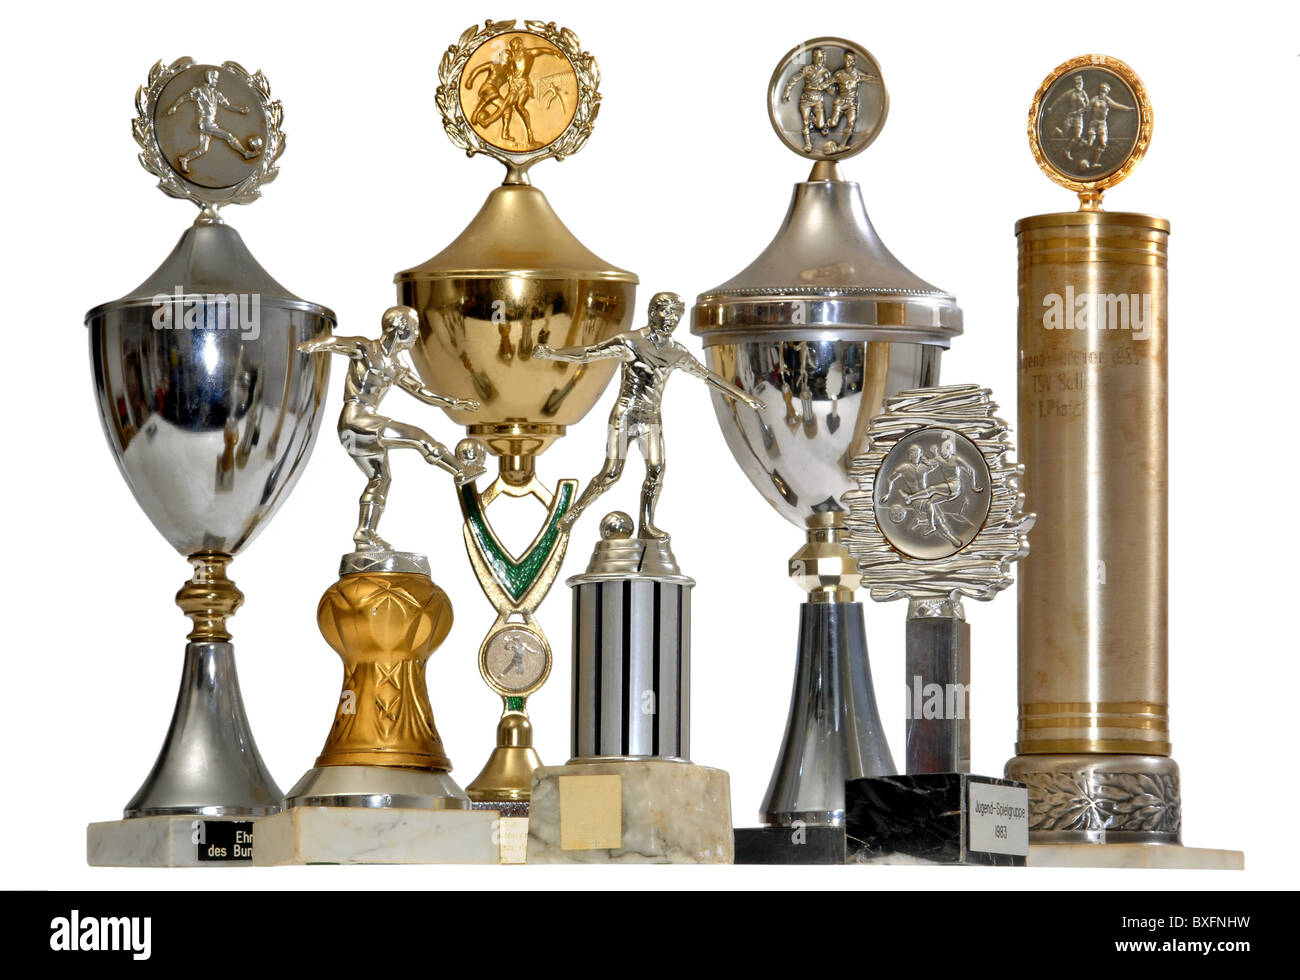 sports, football / soccer, trophies, Germany, circa 1985, Additional-Rights-Clearences-Not Available Stock Photo